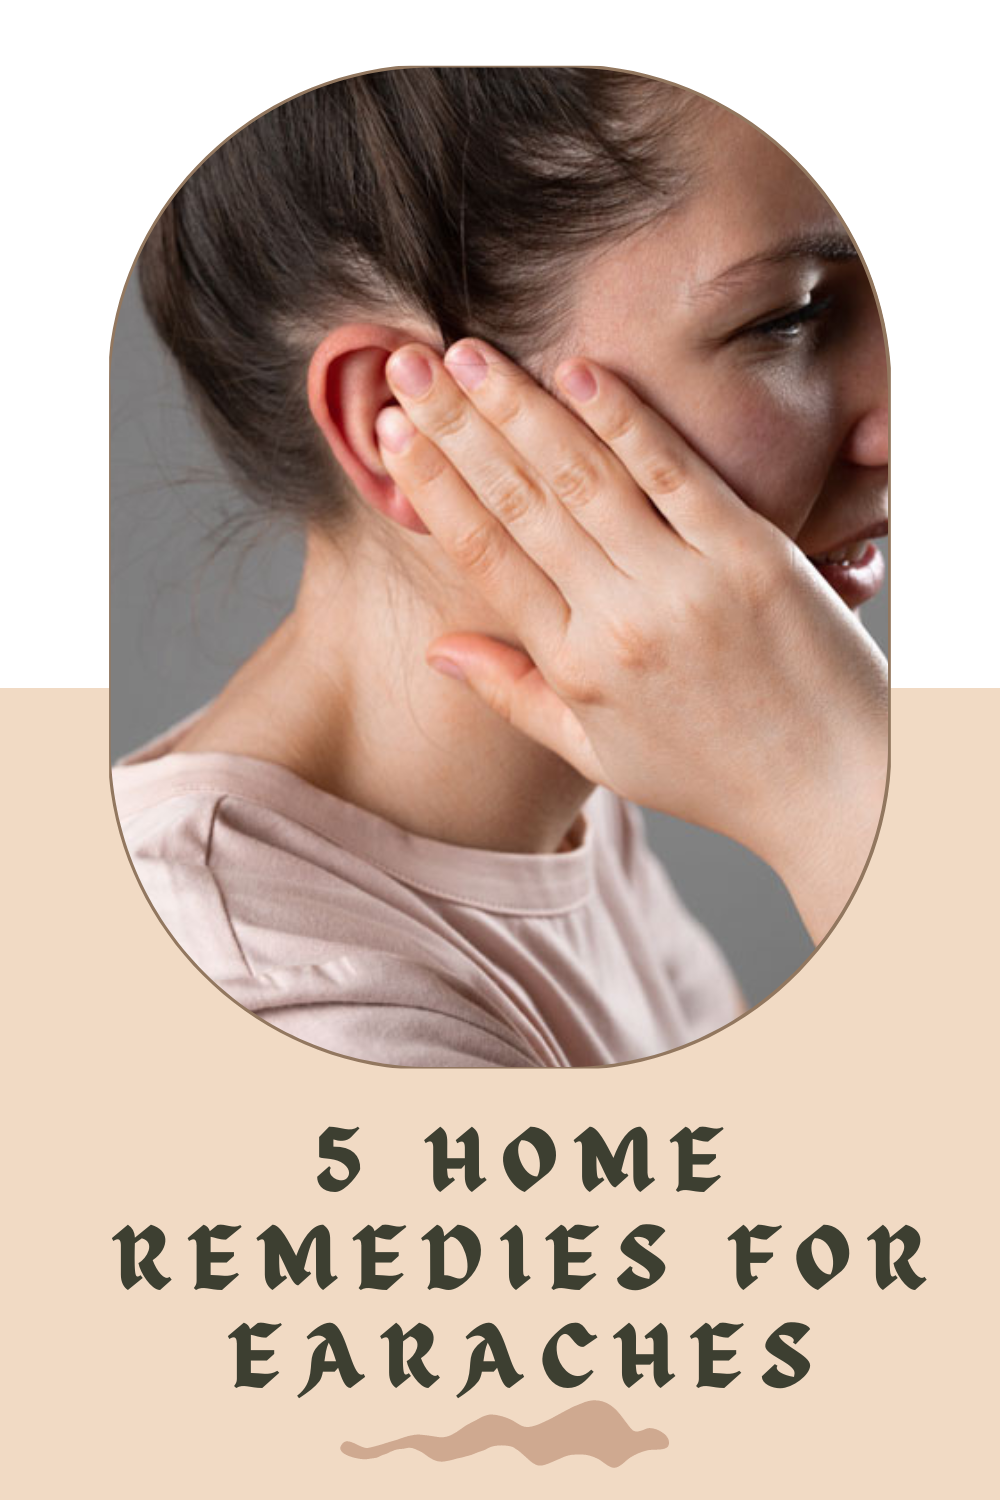 5 Home Remedies for Earaches